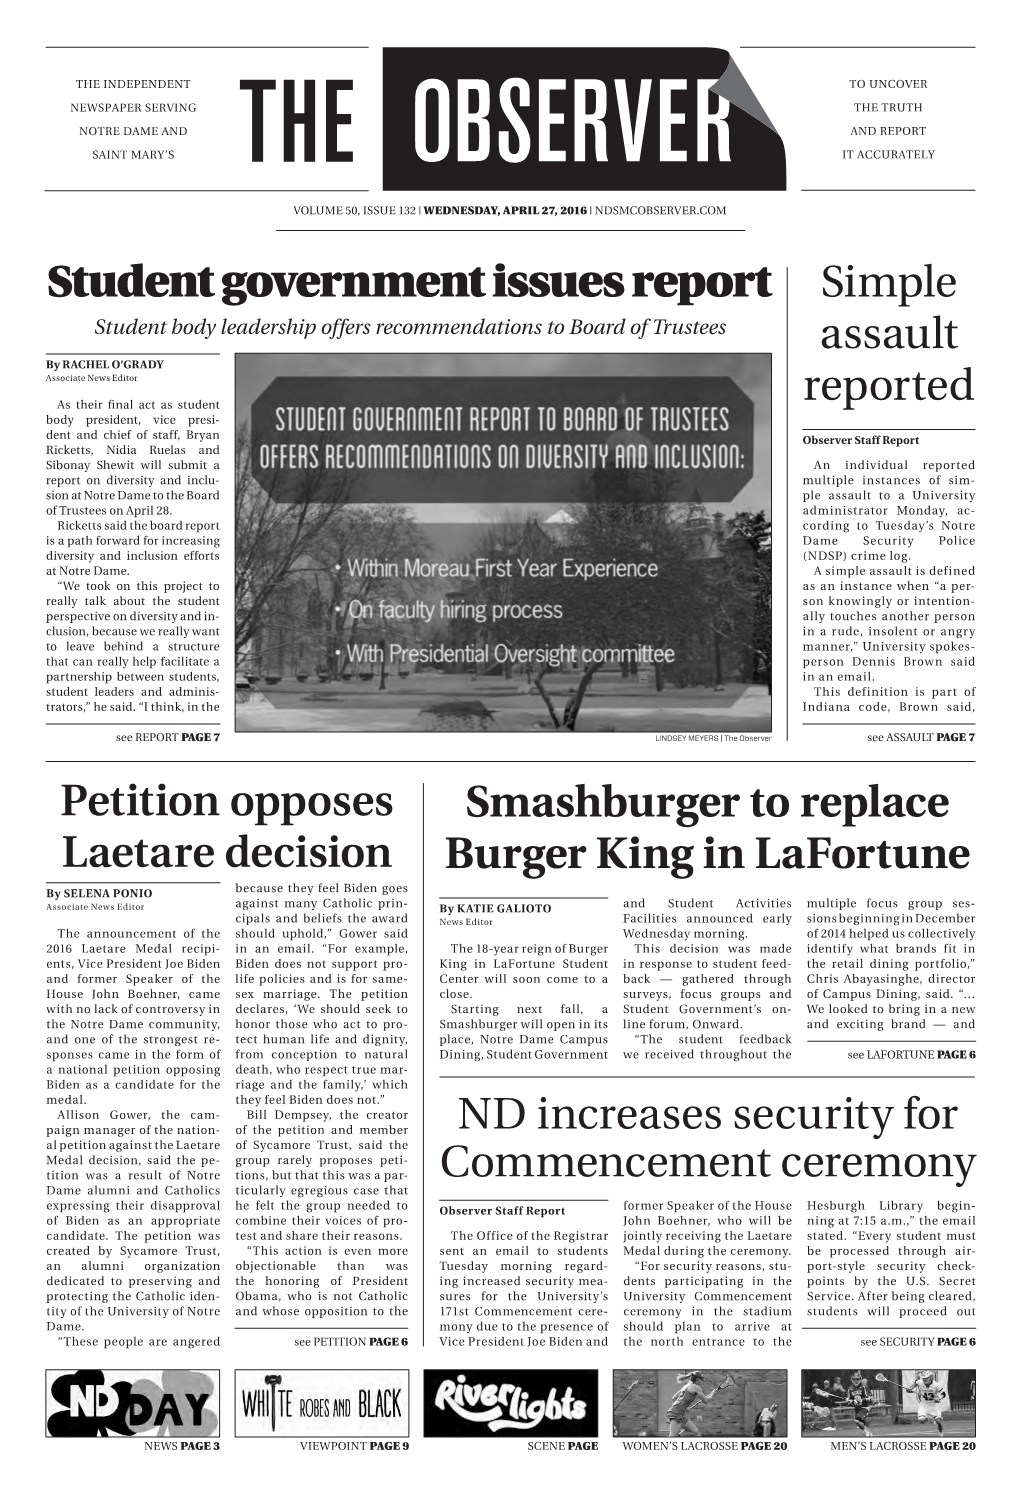 Student Government Issues Report Simple Assault Reported Petition